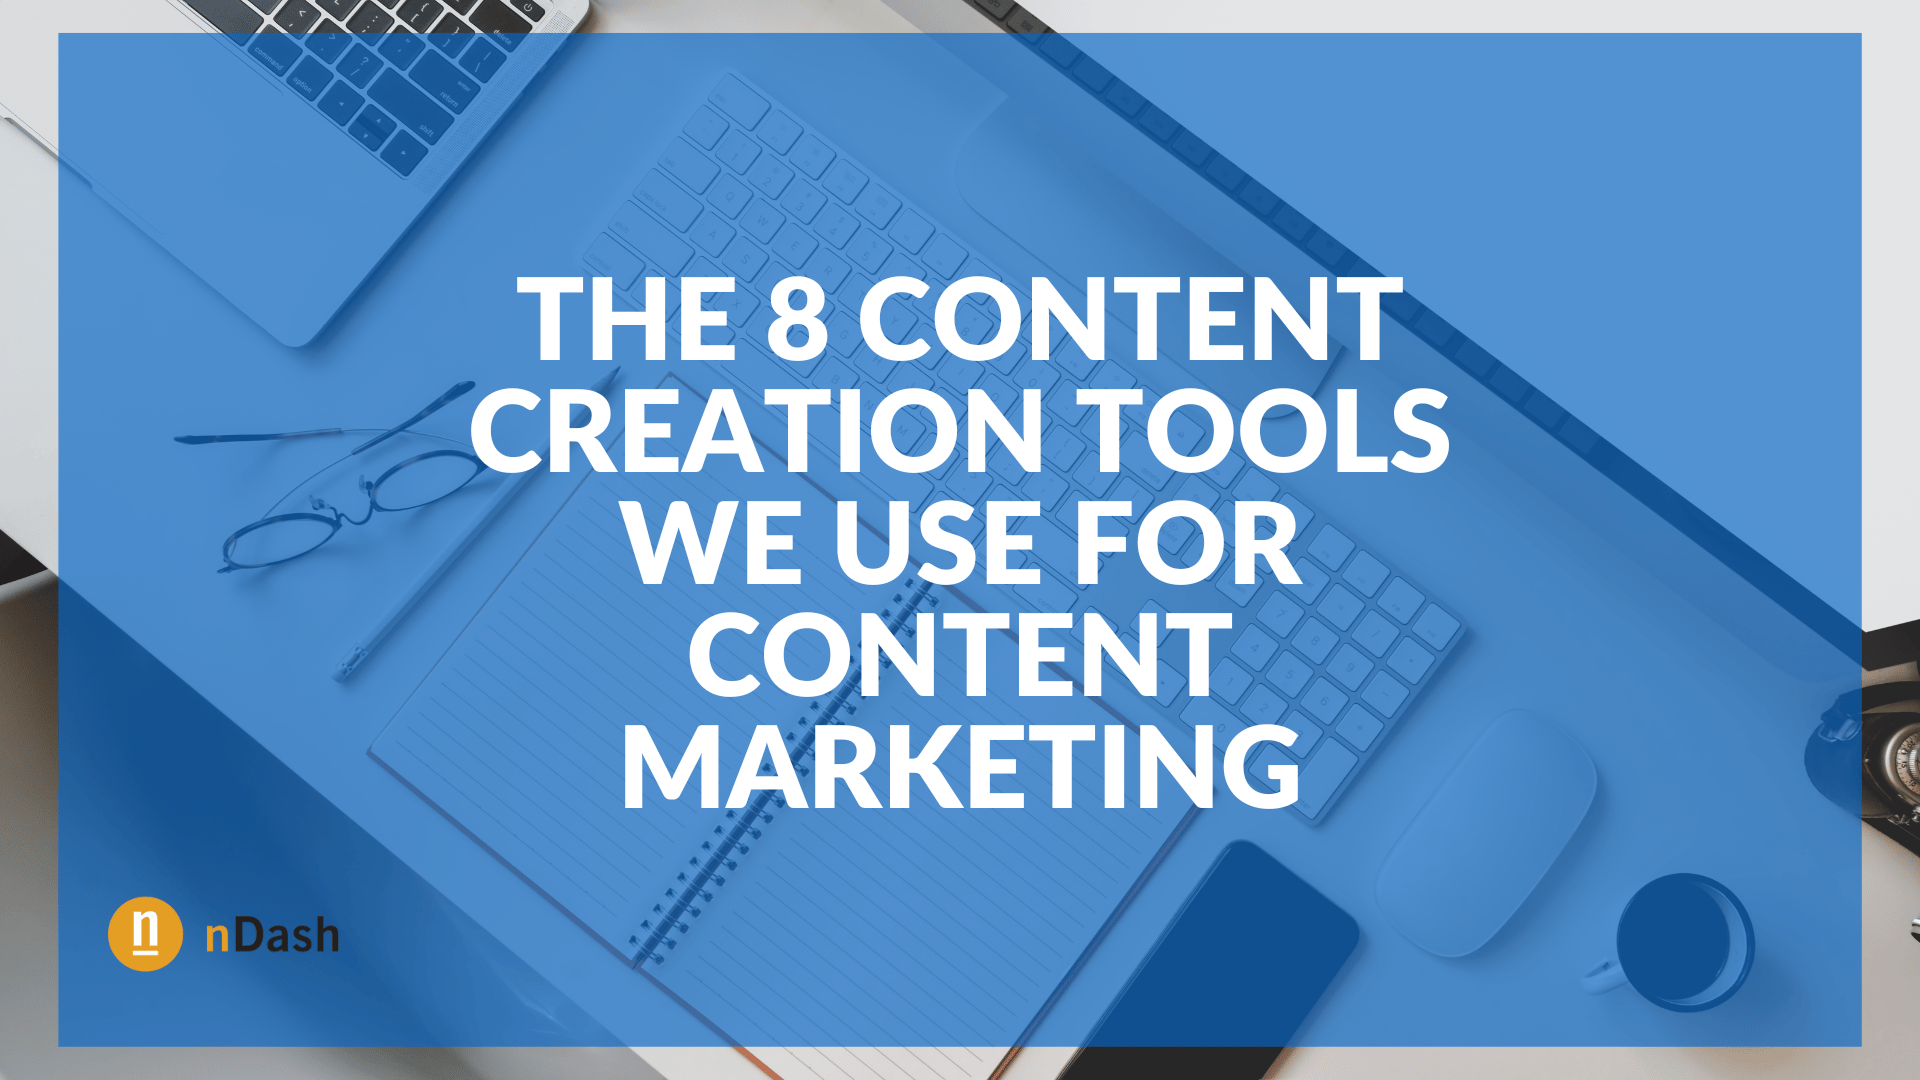 The 8 Content Creation Tools We Use for Content Marketing